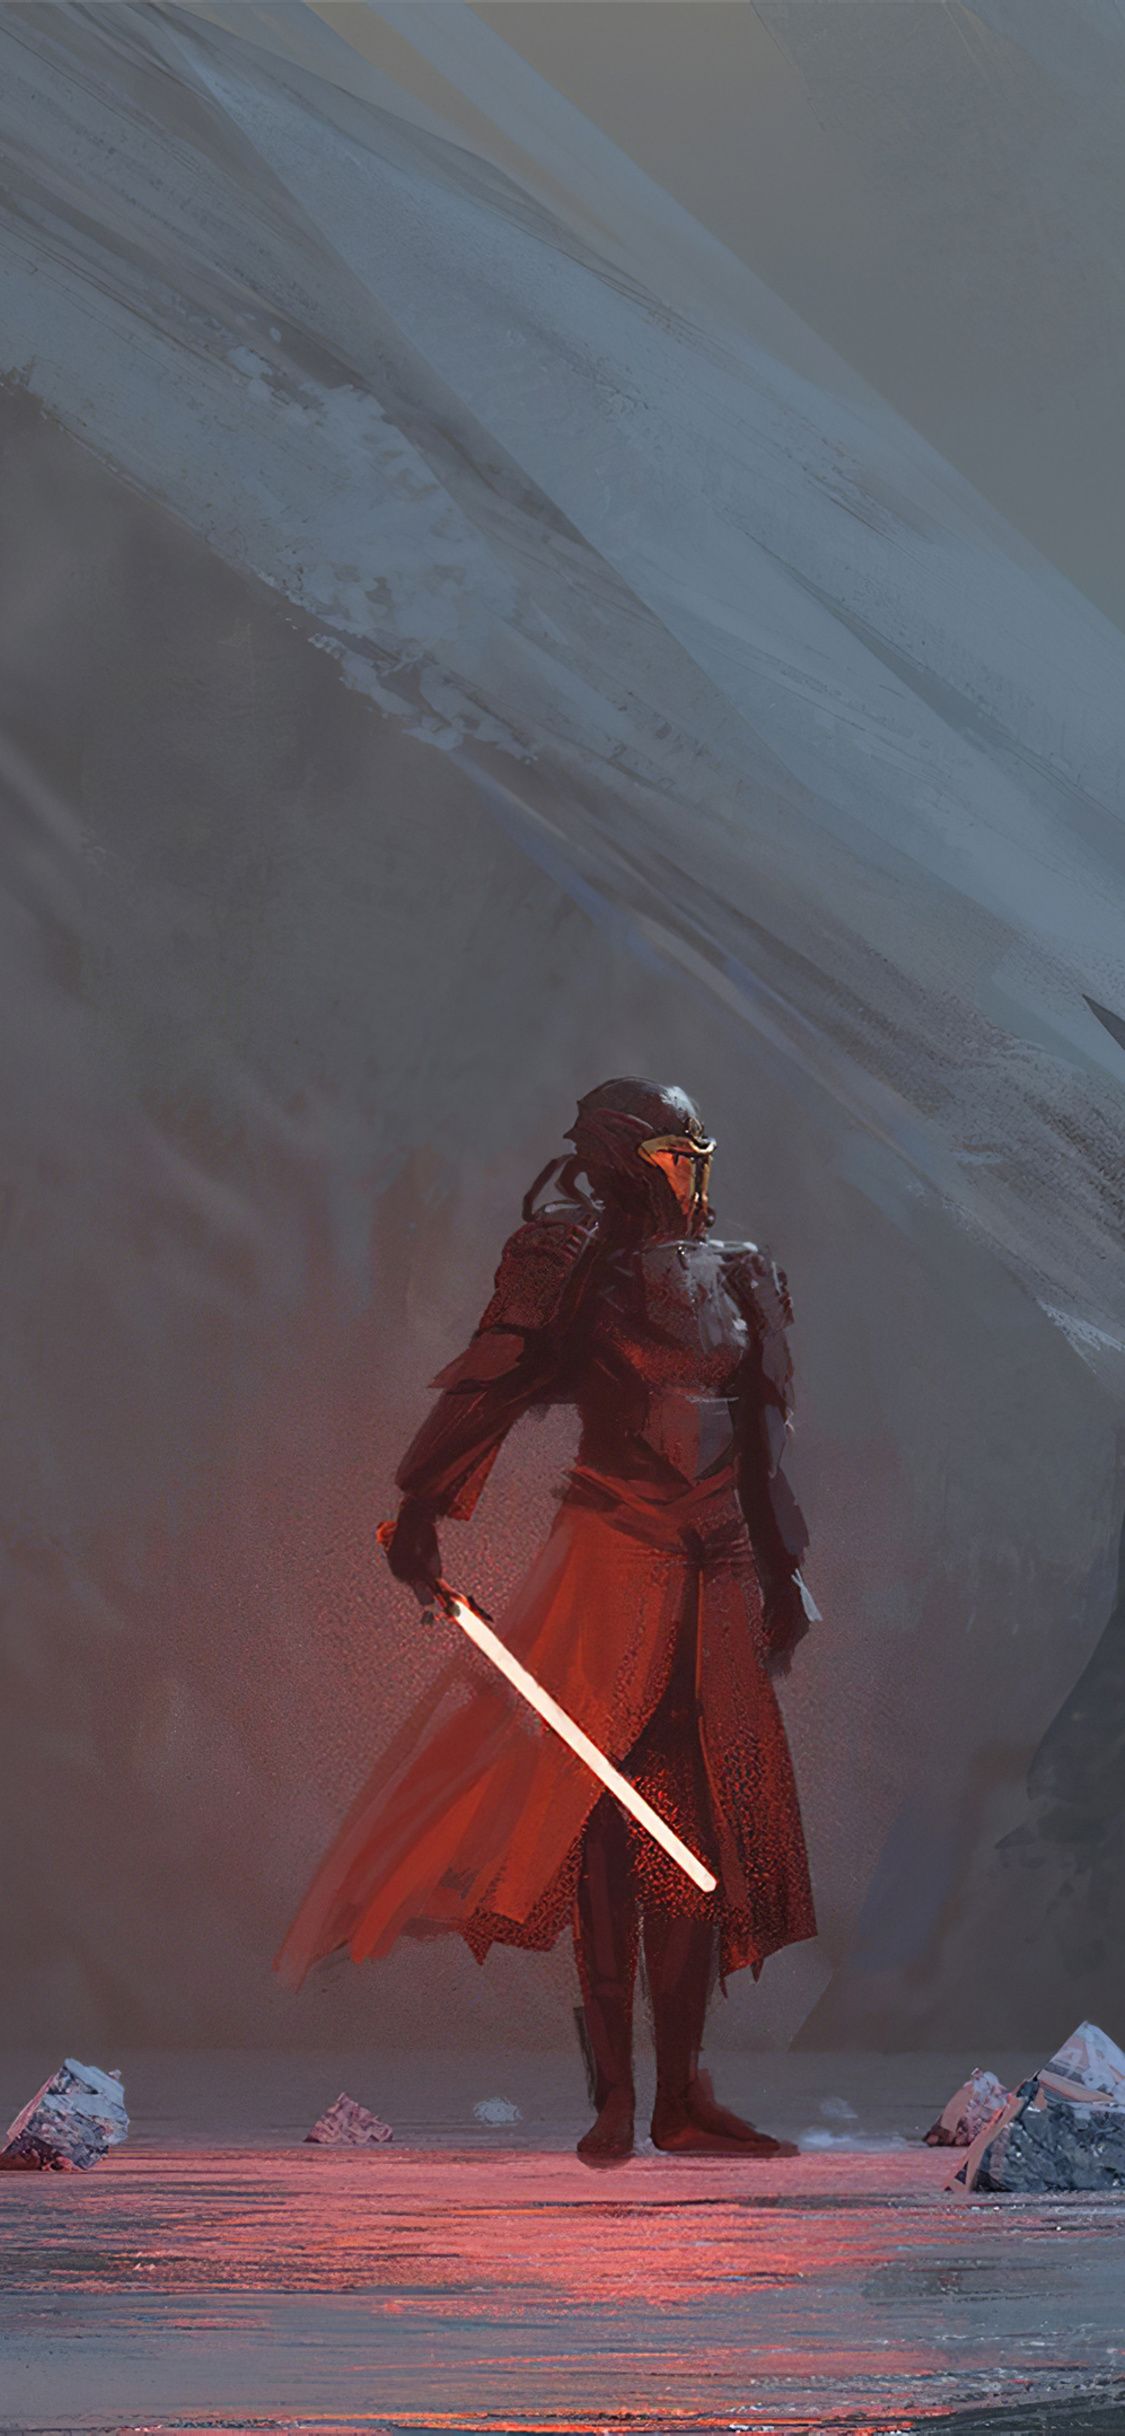 A man with lightsaber standing in the snow - Star Wars